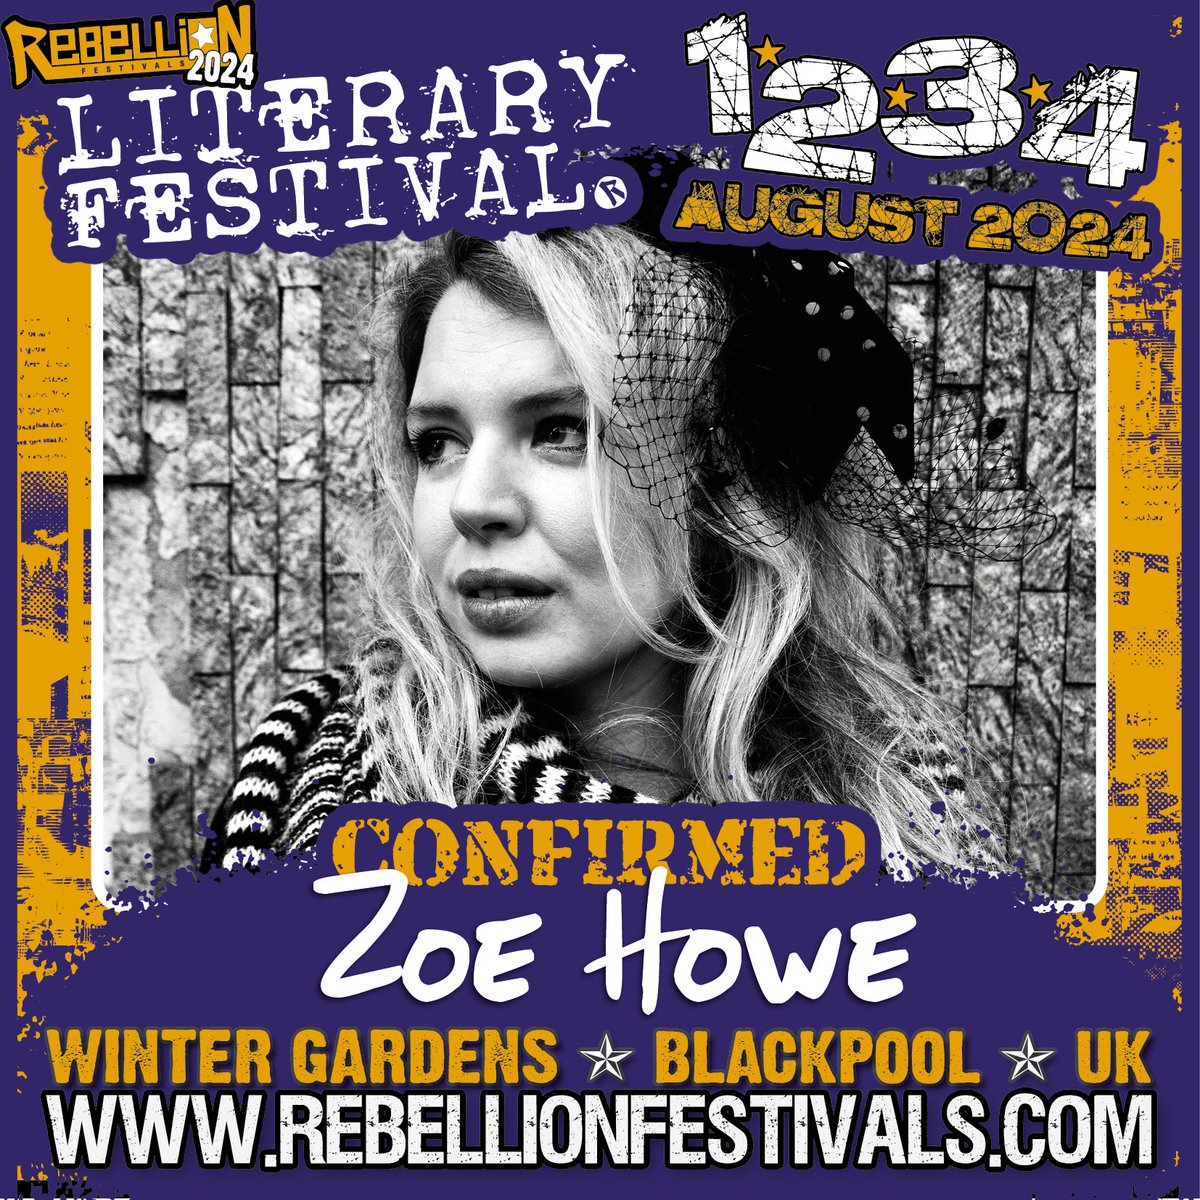 Day 2 (Friday) @RebellionFest Line up so far👇 I'll be checking out @Vulpynes / SalfordJets & loads more, plus I'll be at the Literary Stage with #ZoëHowe rebellionfestivals.com/line-up Weekend & limited Day tickets available TICKETS: rebellion.keekmerch.com #rebellionfest #guestbooker